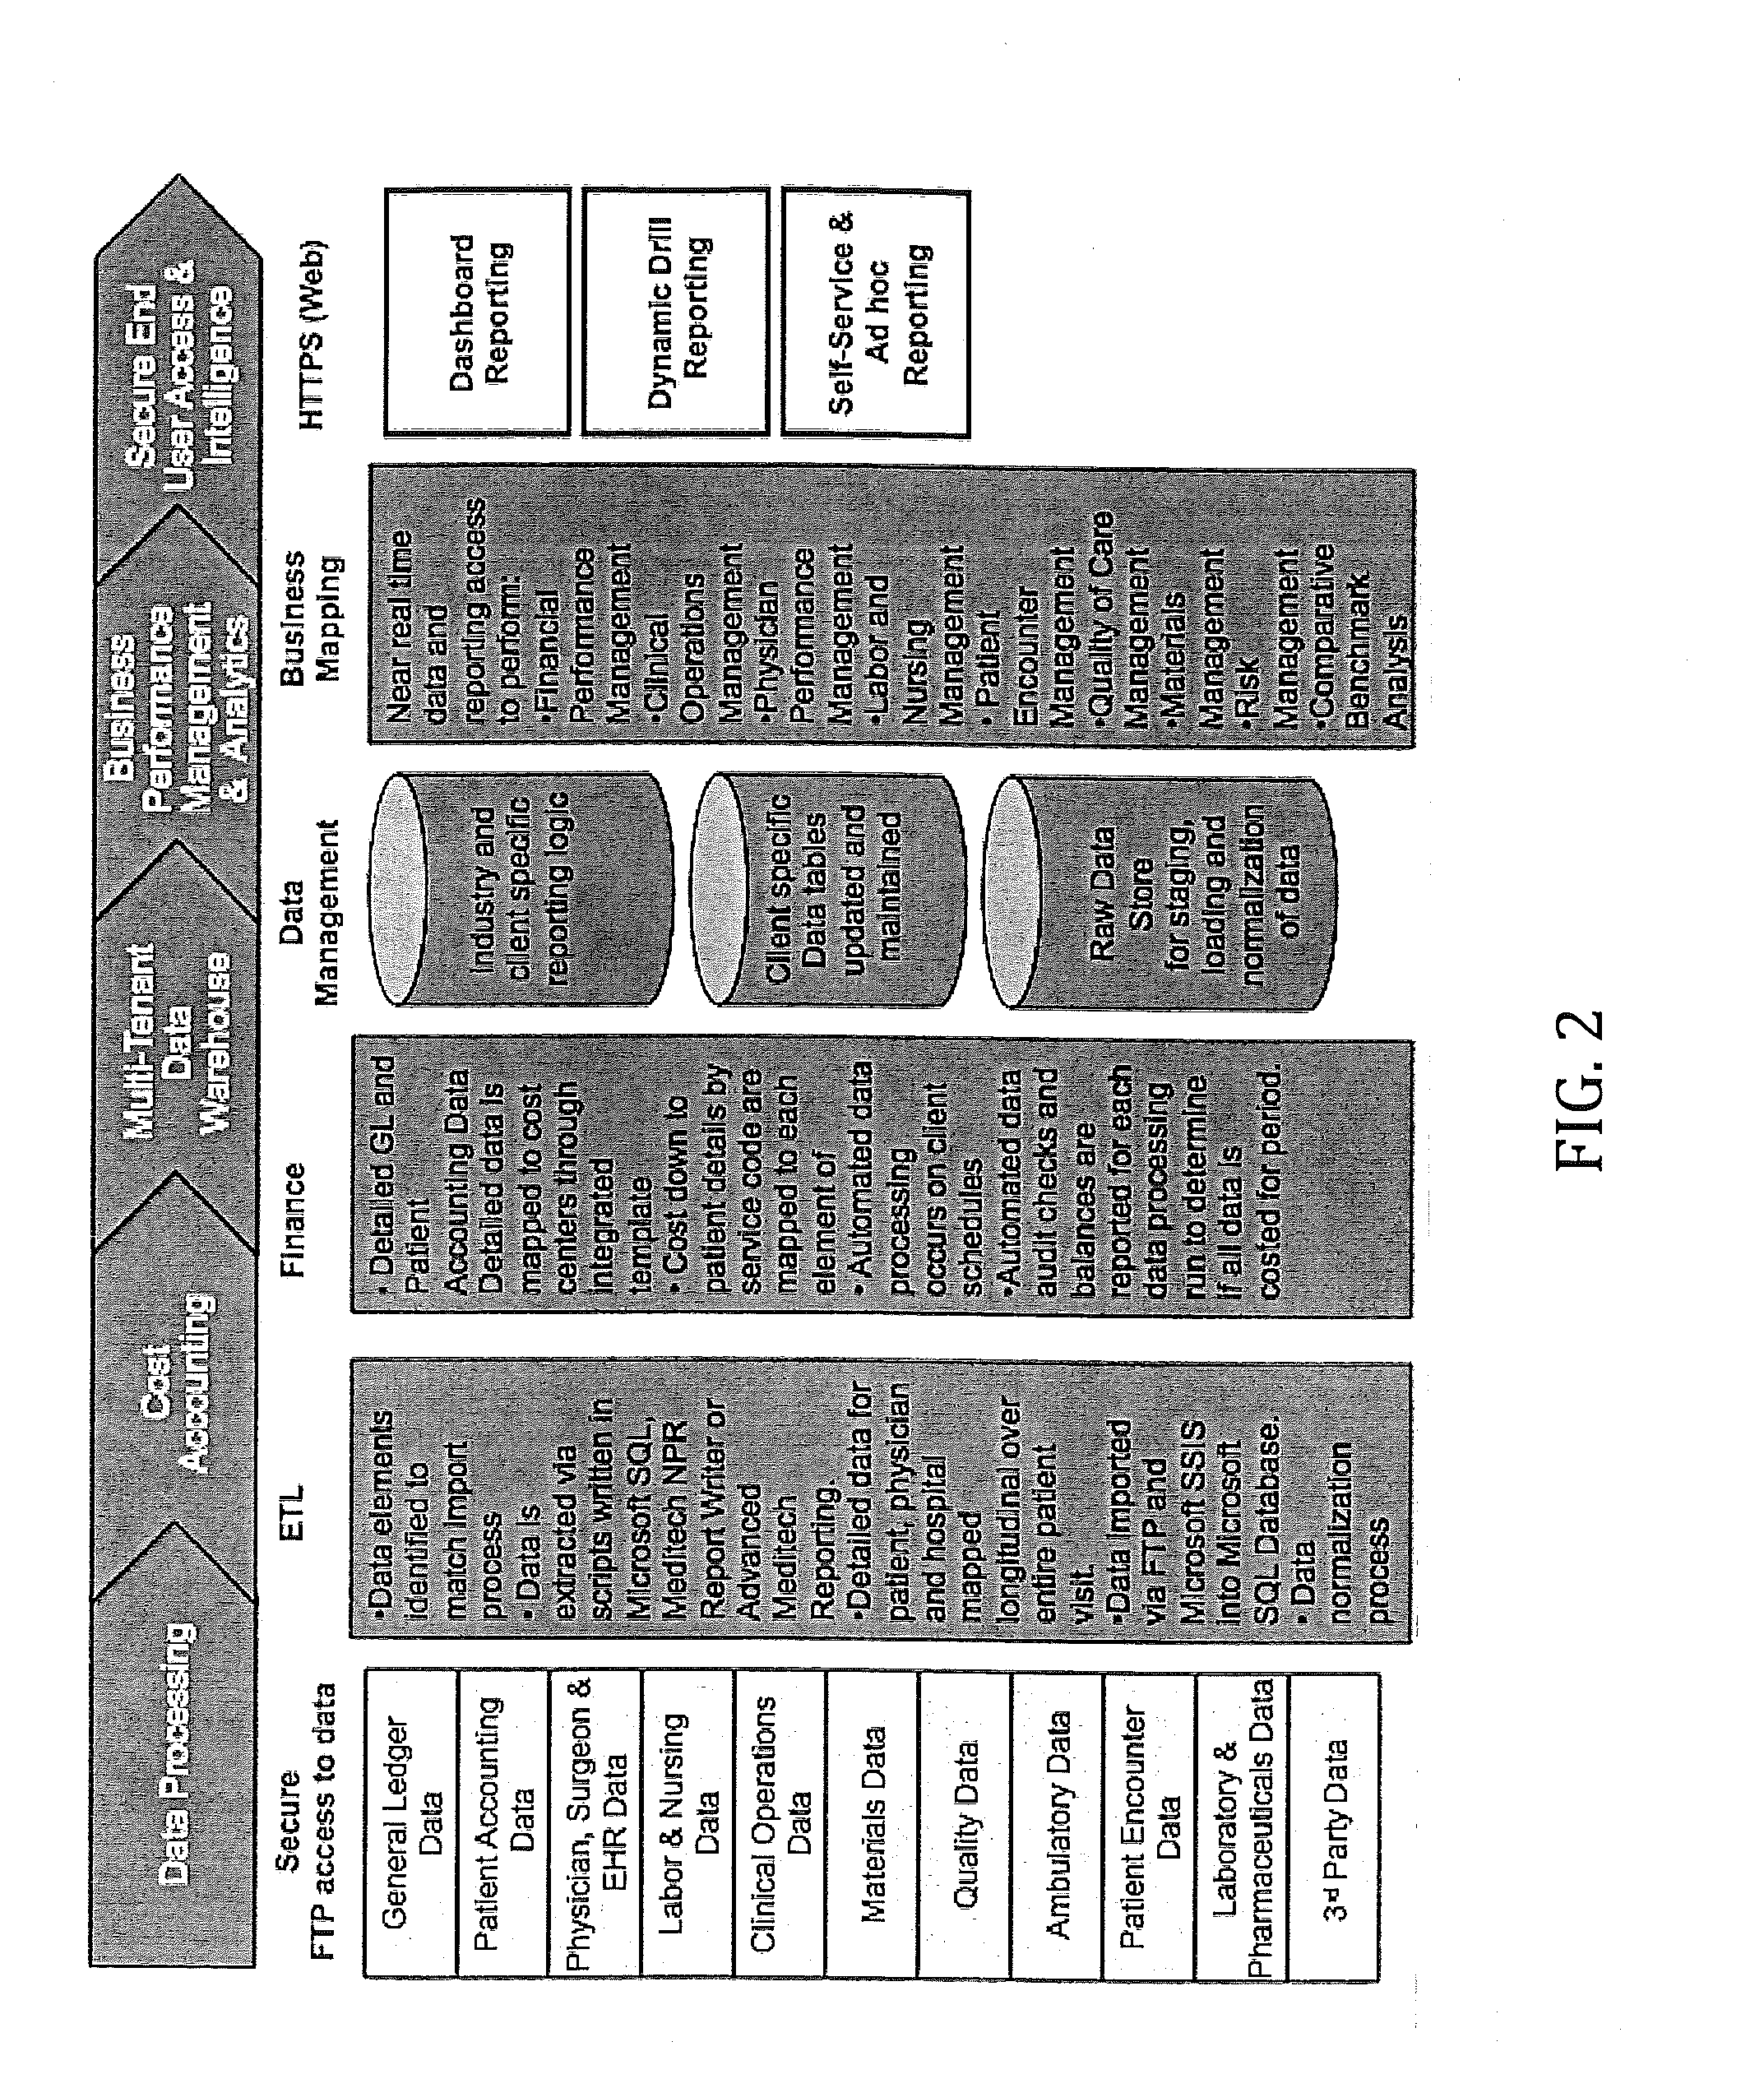 System and Method for Producing Performance Reporting and Comparative Analytics for Finance, Clinical Operations, Physician Management, Patient Encounter, and Quality of Patient Care